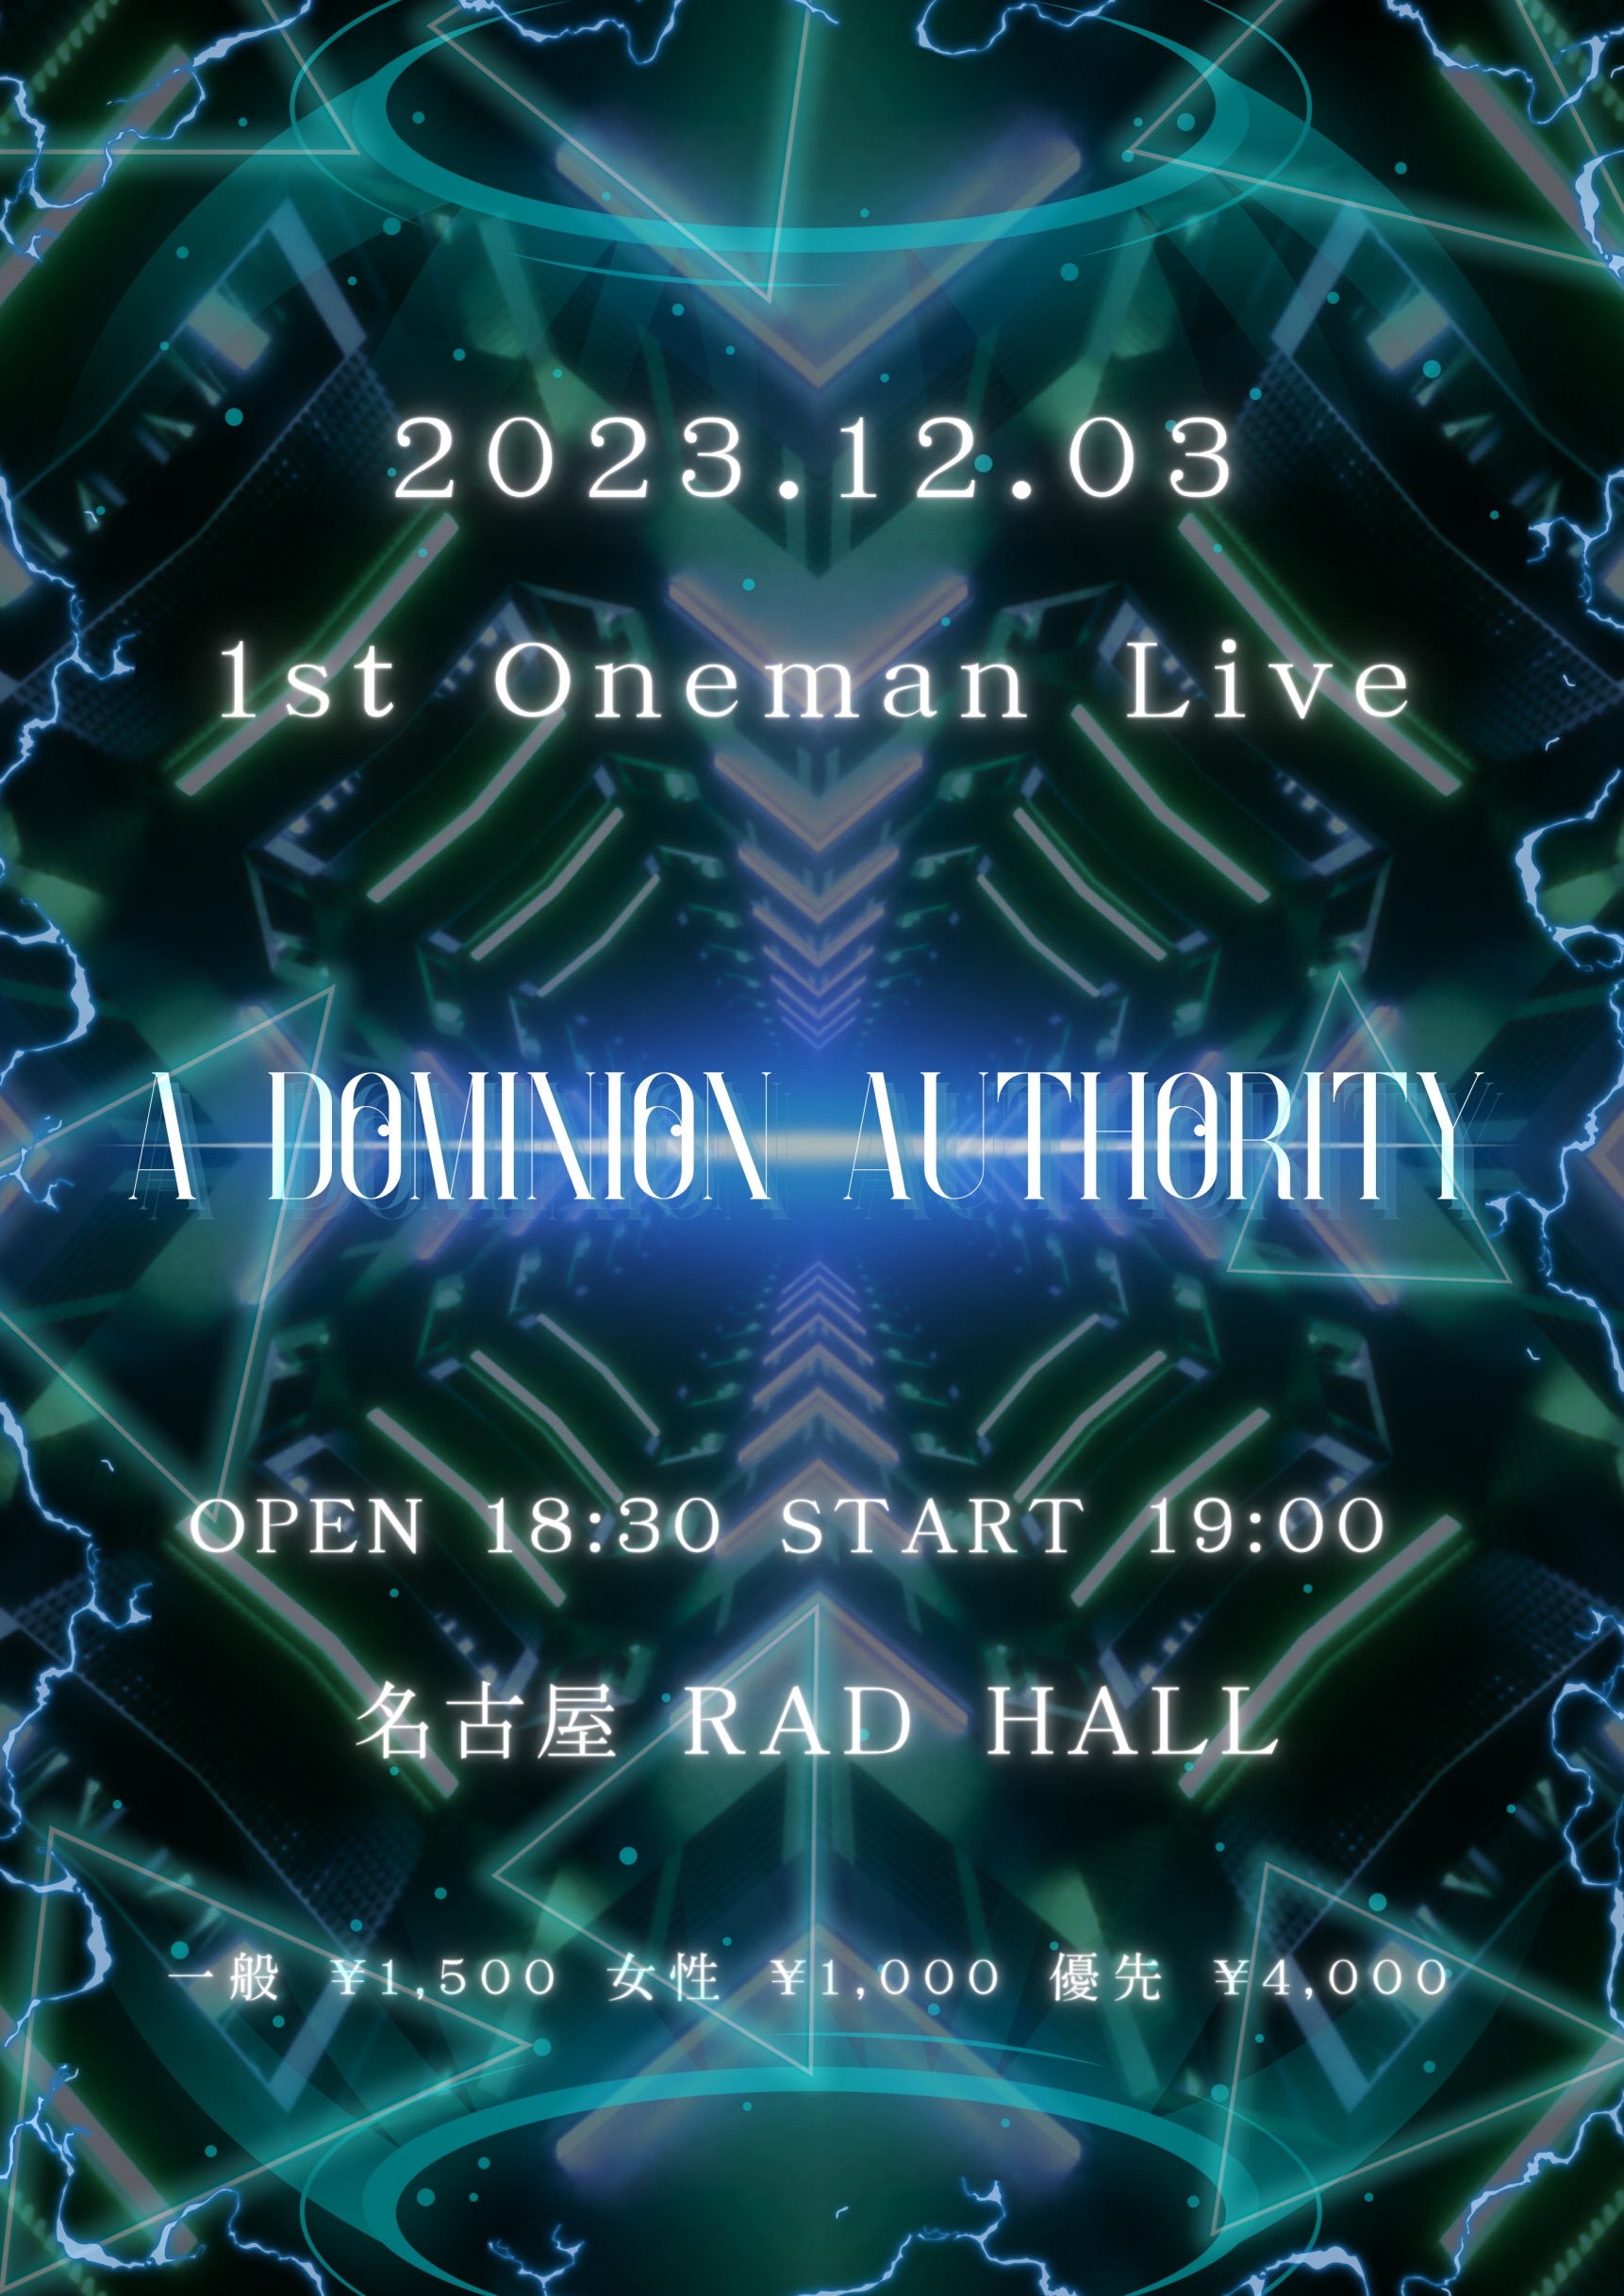 1st ONEMAN LIVE 「a dominion authority」